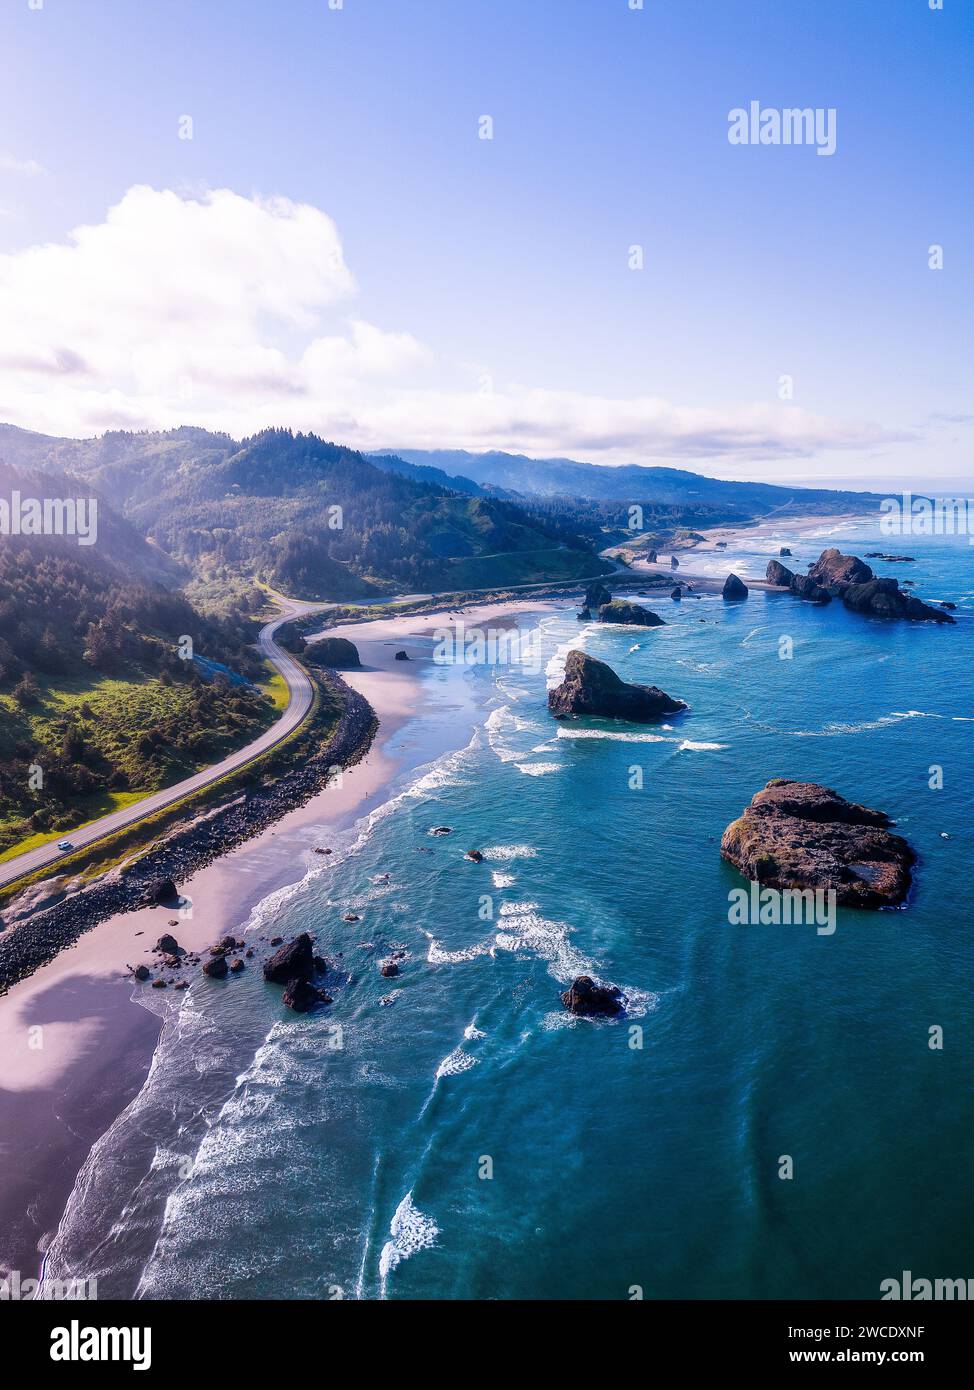 A fine art landscape photography image of the dreamy and softly lit Oregon Coastline on a bright and vibrant Spring day. Stock Photo